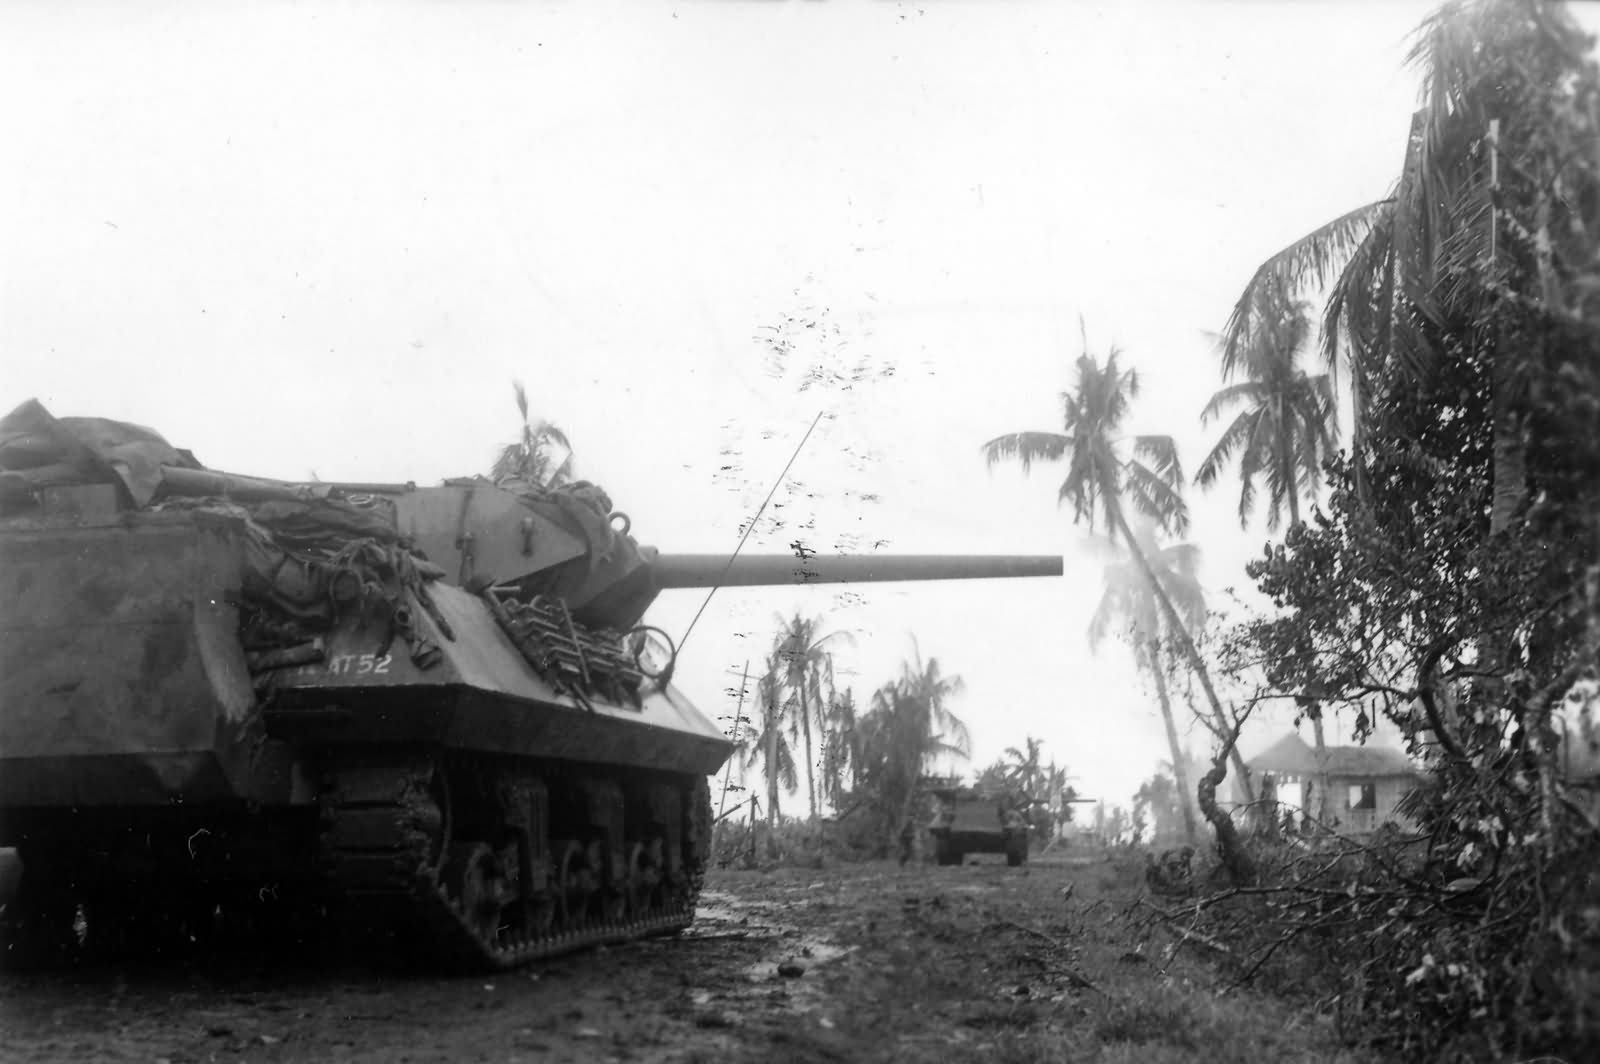 M10 Wolverine of 77th Infantry Division Leyte Island 1944